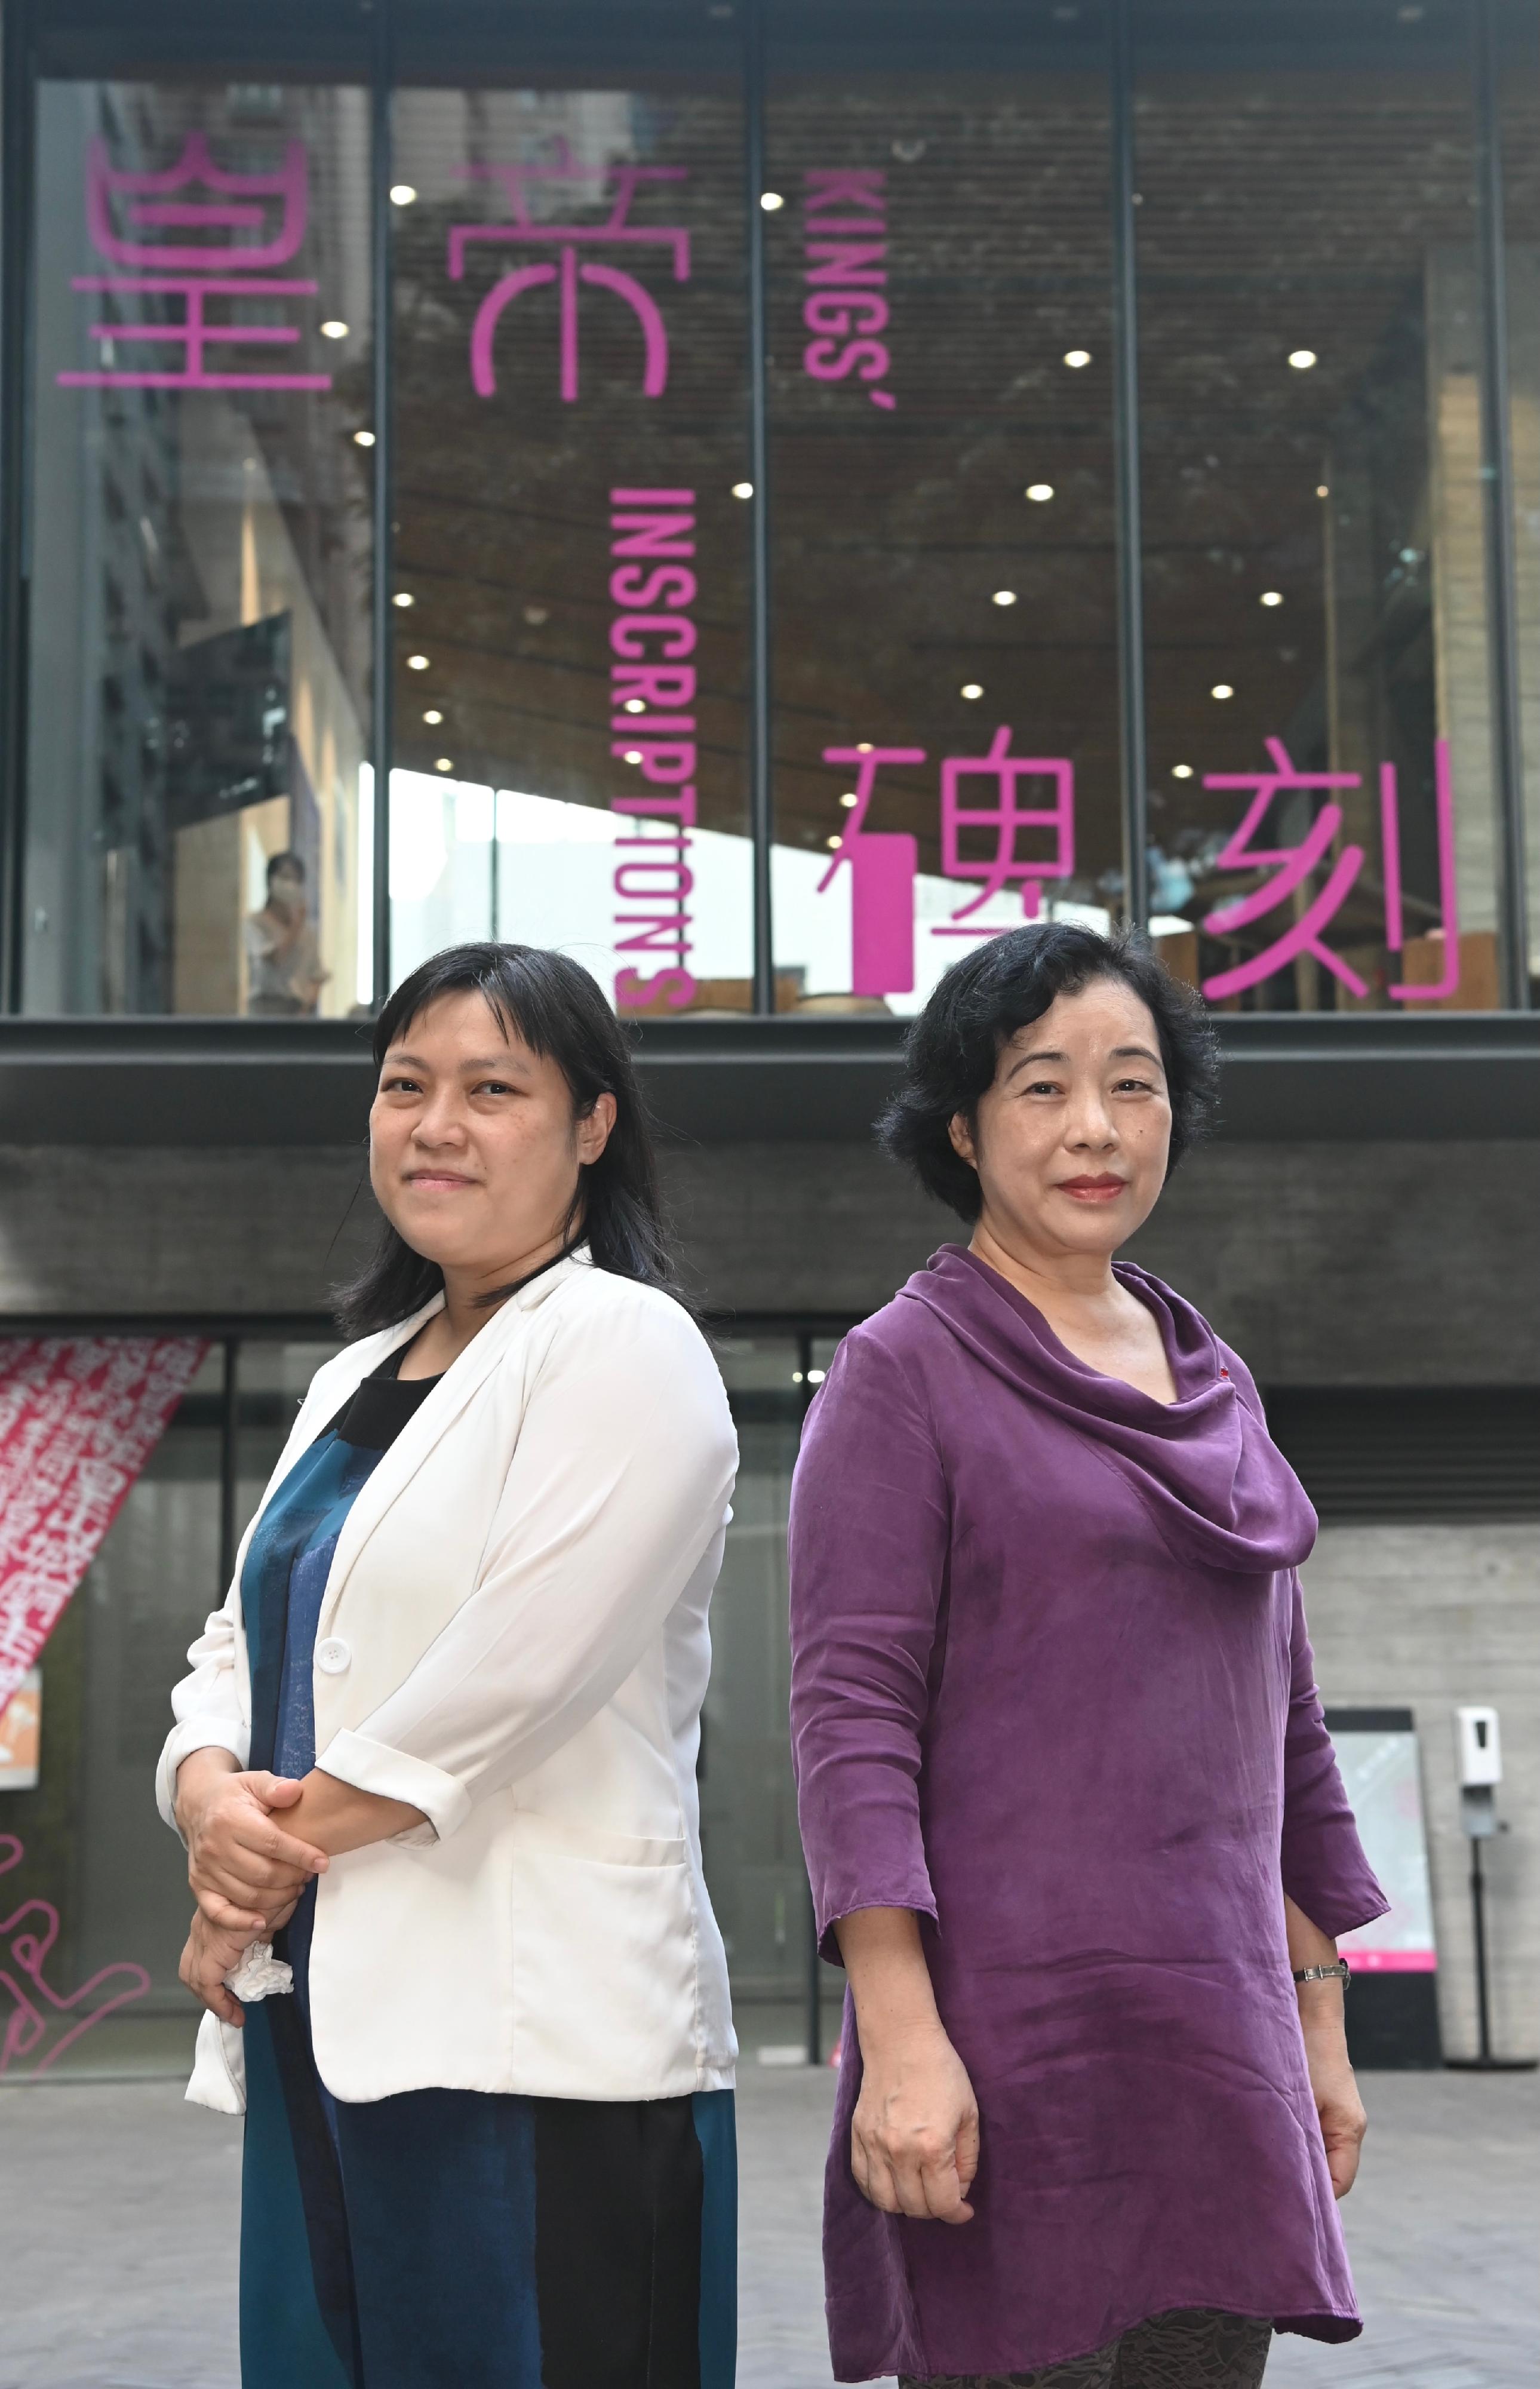 The "Archaic Curator Series: Kings' Inscriptions‧Contemporary Interpretations" exhibition will be open to the public from tomorrow (September 28) to February 18 next year at Oi! Glassie. Photo shows the Head of Art Promotion Office, Dr Lesley Lau (right), and the guest curator of the exhibition, Dr Sarah Ng (left).